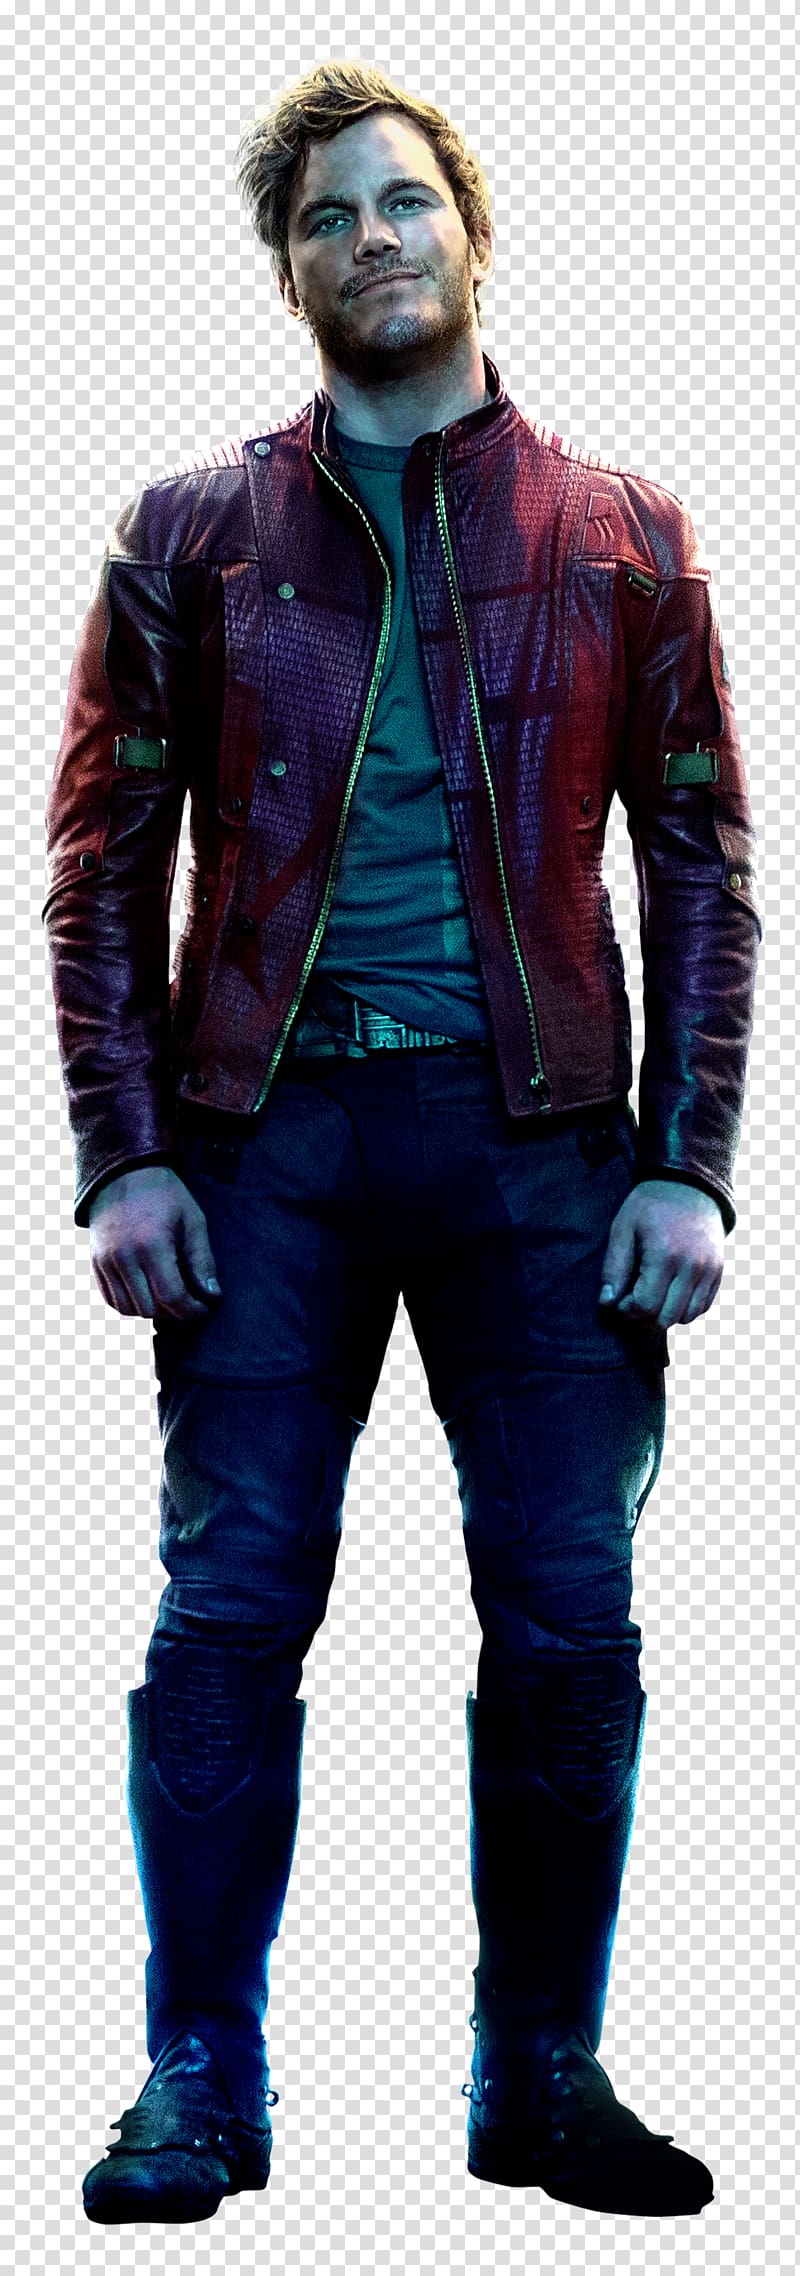 Chris Pratt Star-Lord Guardians of the Galaxy Gamora Rocket Raccoon, colossus transparent background PNG clipart